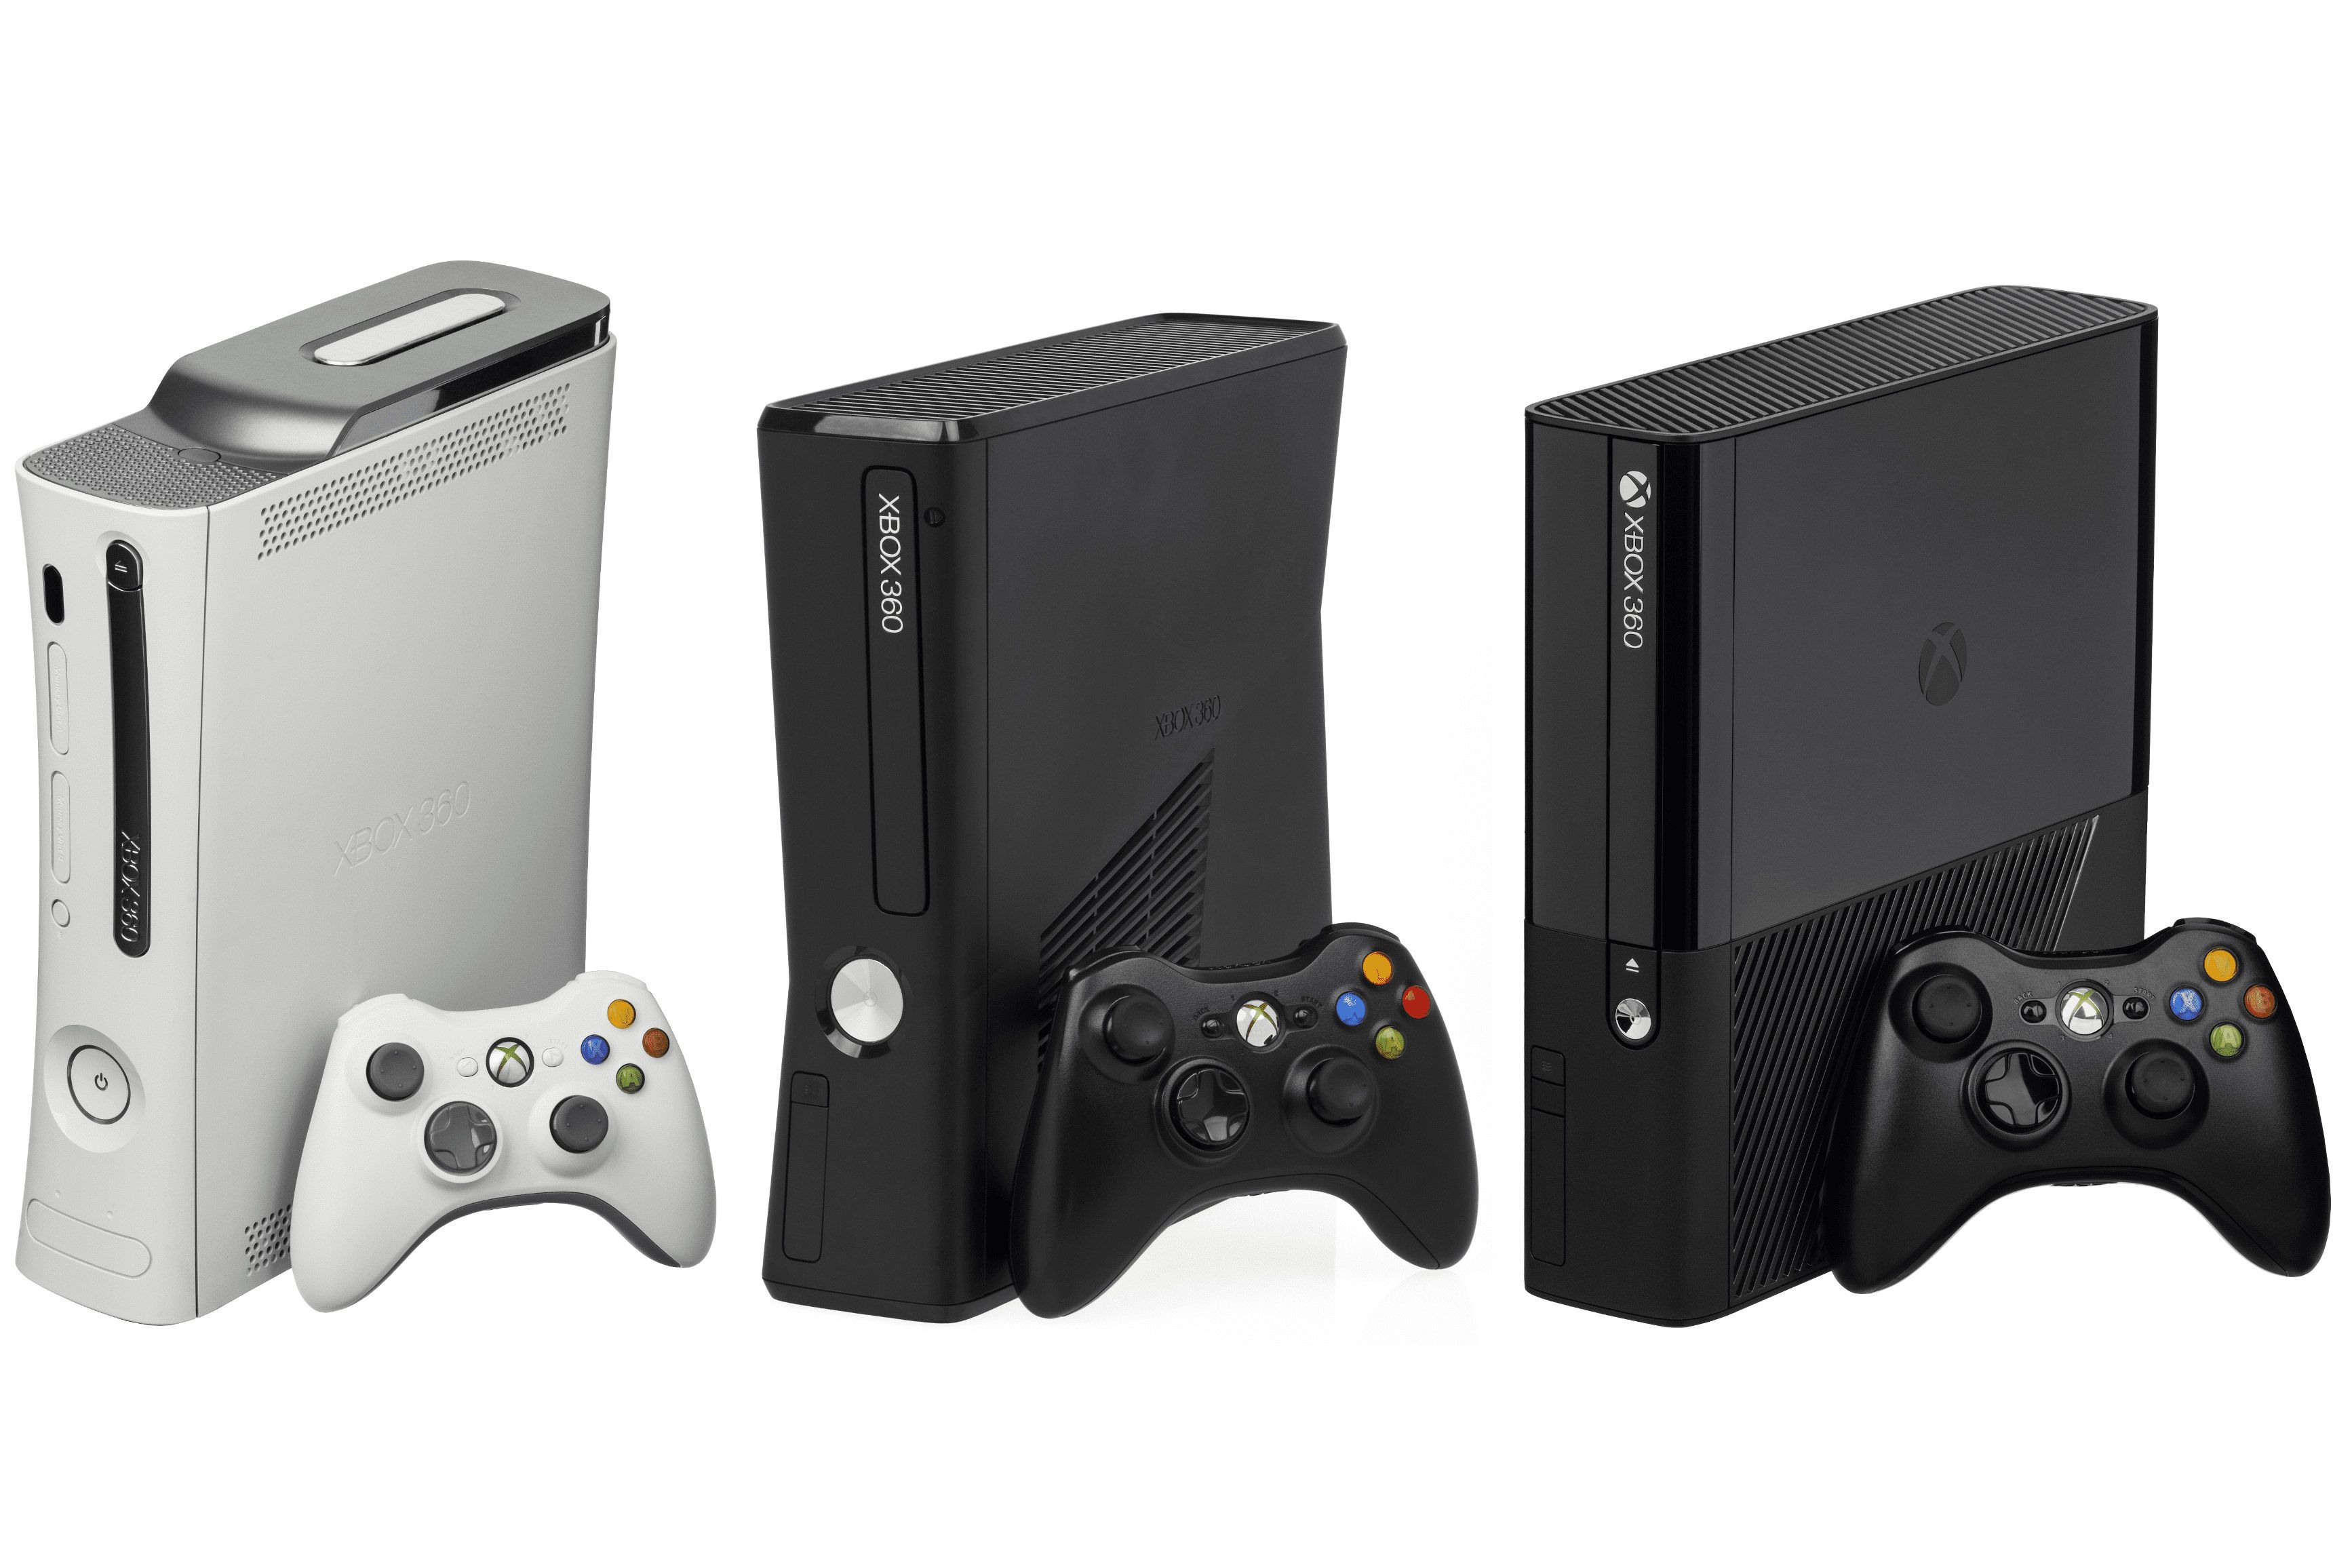 Different models of the Xbox 360